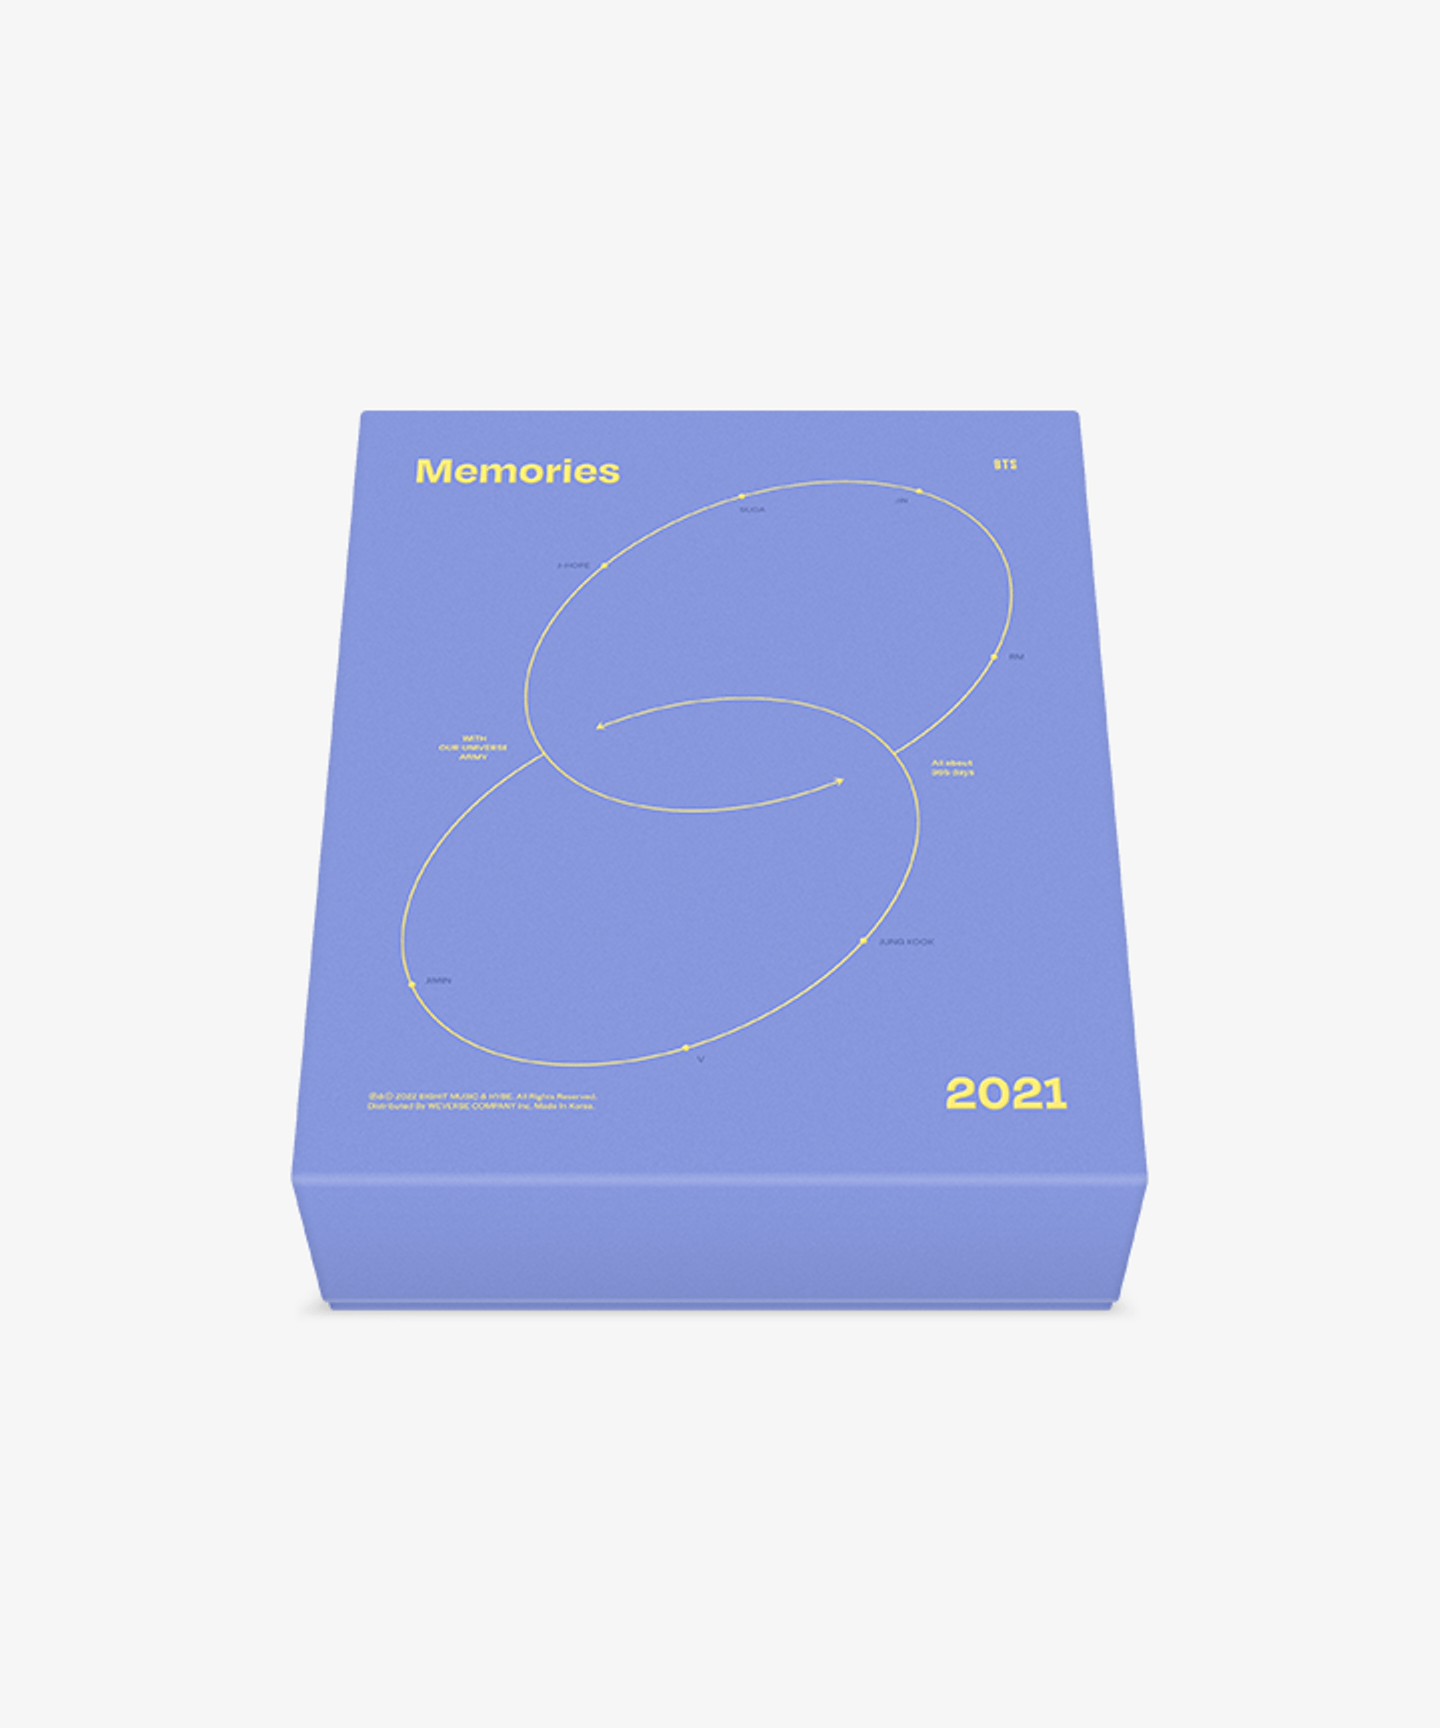 BTS - MEMORIES OF 2021 BLU-RAY With Weverse Benefits - SOKOLLAB